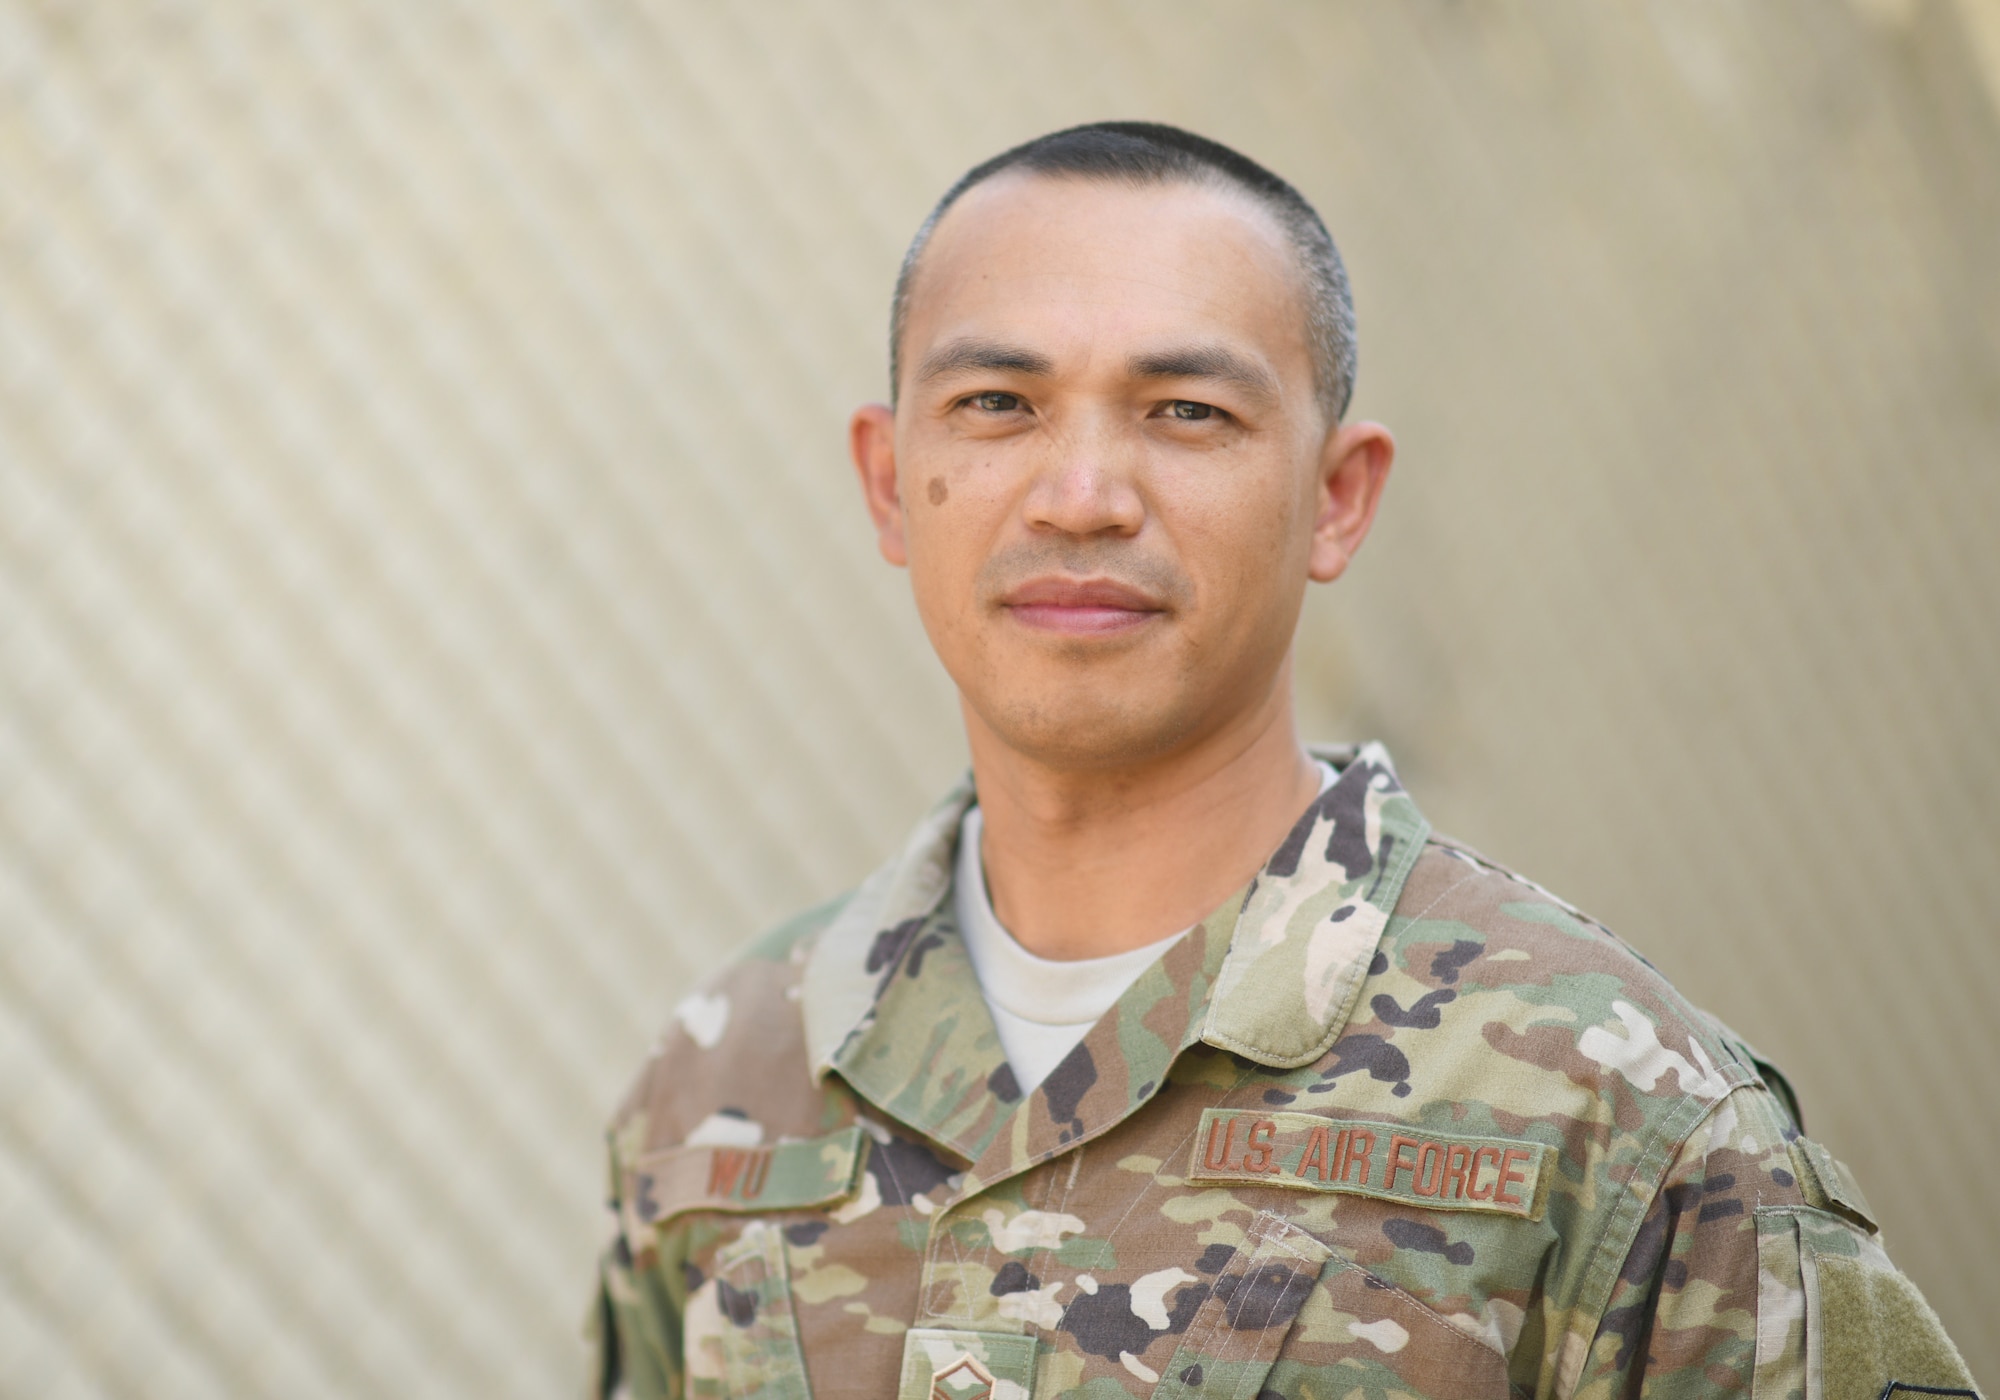 U.S. Air Force Master Sgt. Corey Wu, 726th Expeditionary Air Base Squadron disbursing agent, poses for a photo at Camp Lemonnier, Djibouti, Nov. 15, 2019. Last fiscal year, the 726th EABS Finance and Contracting Airmen executed more than $22 million, sustaining and building missions at three locations across East Africa. (U.S. Air Force photo by Staff Sgt. Alex Fox Echols III)